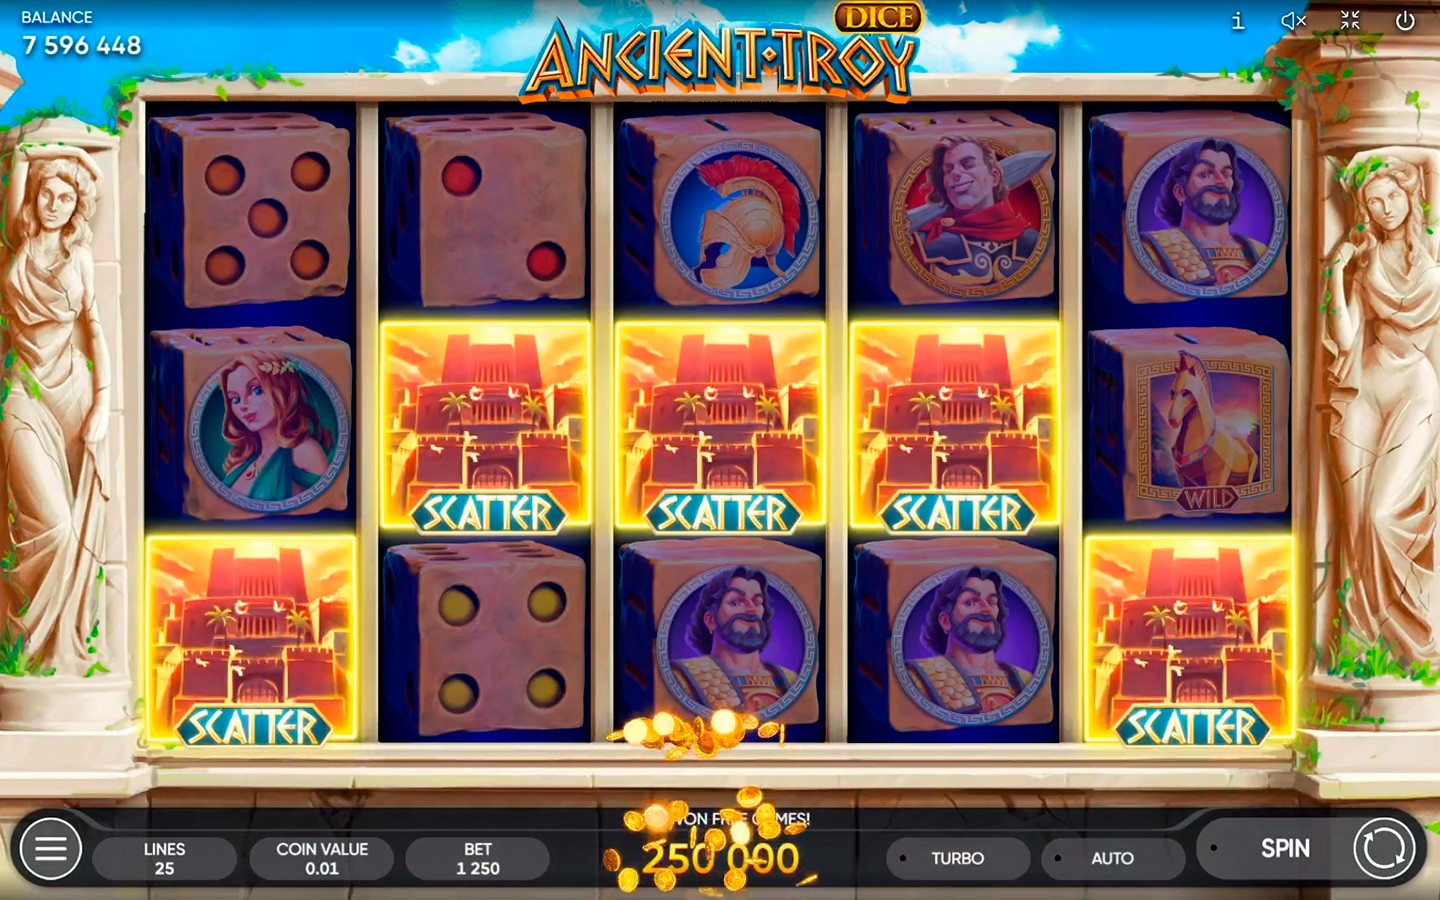 BEST DICE SLOTS ONLINE | Try ANCIENT TROY DICE SLOT now